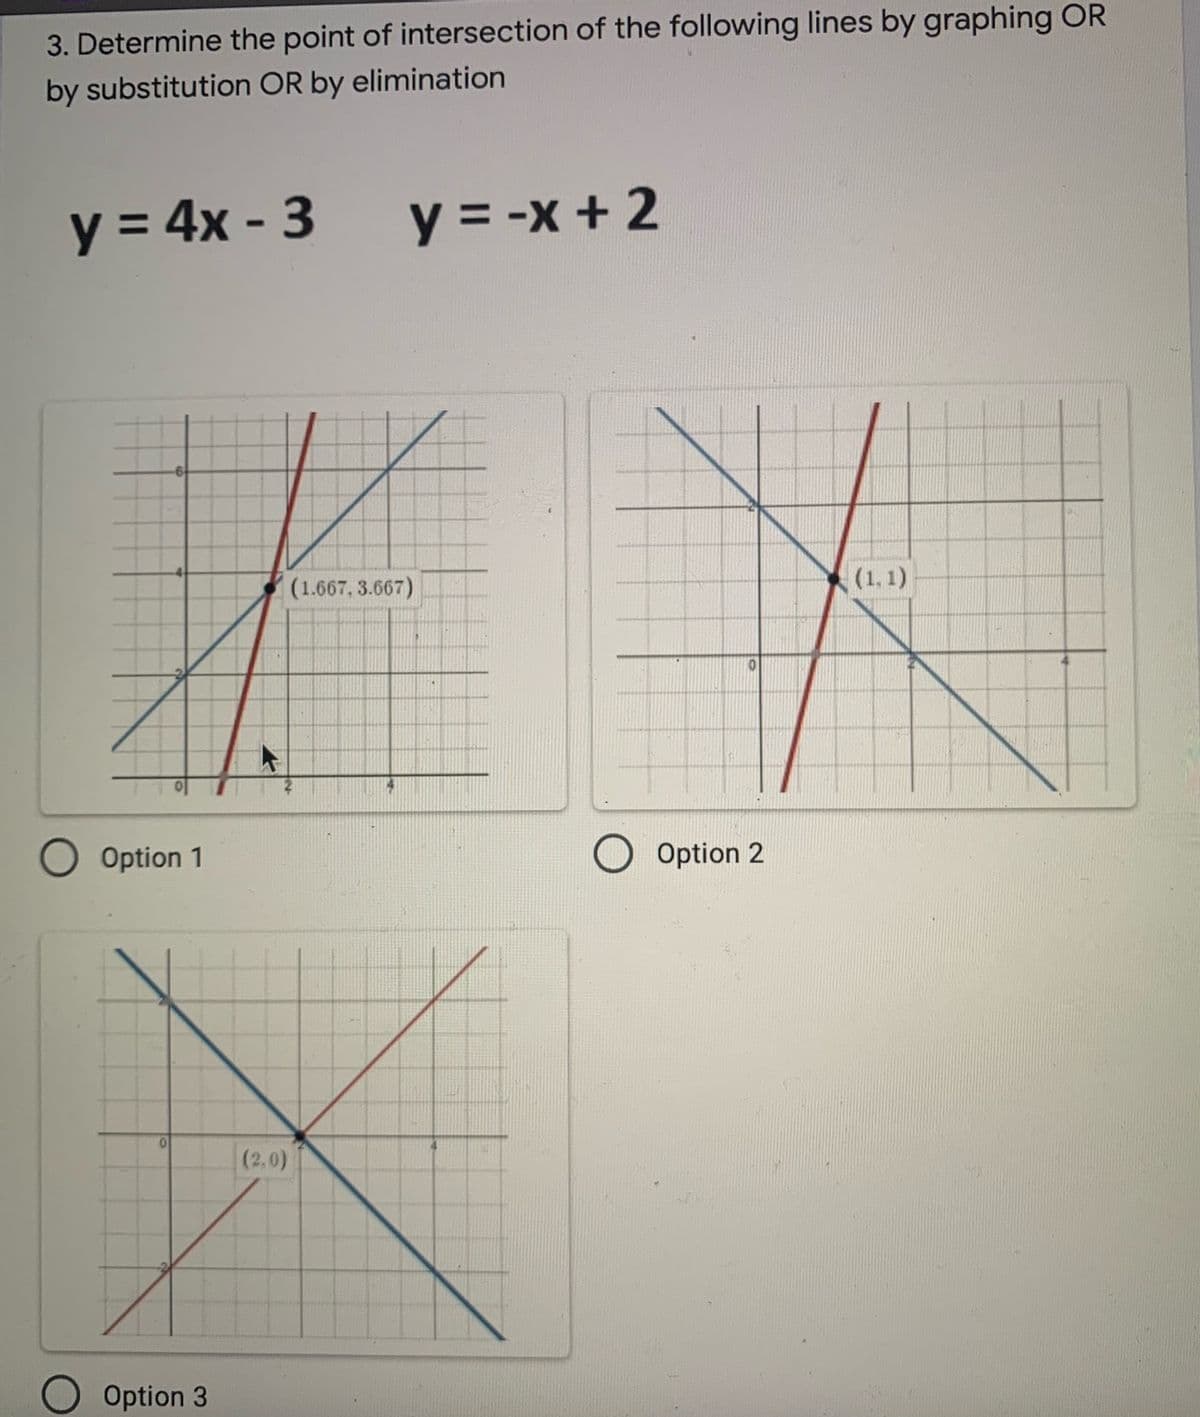 3. Determine the point of intersection of the following lines by graphing OR
by substitution OR by elimination
y = 4x - 3
y = -x + 2
(1.667, 3.667)
(1,1)
O Option 1
O Option 2
(2.0)
Option 3
